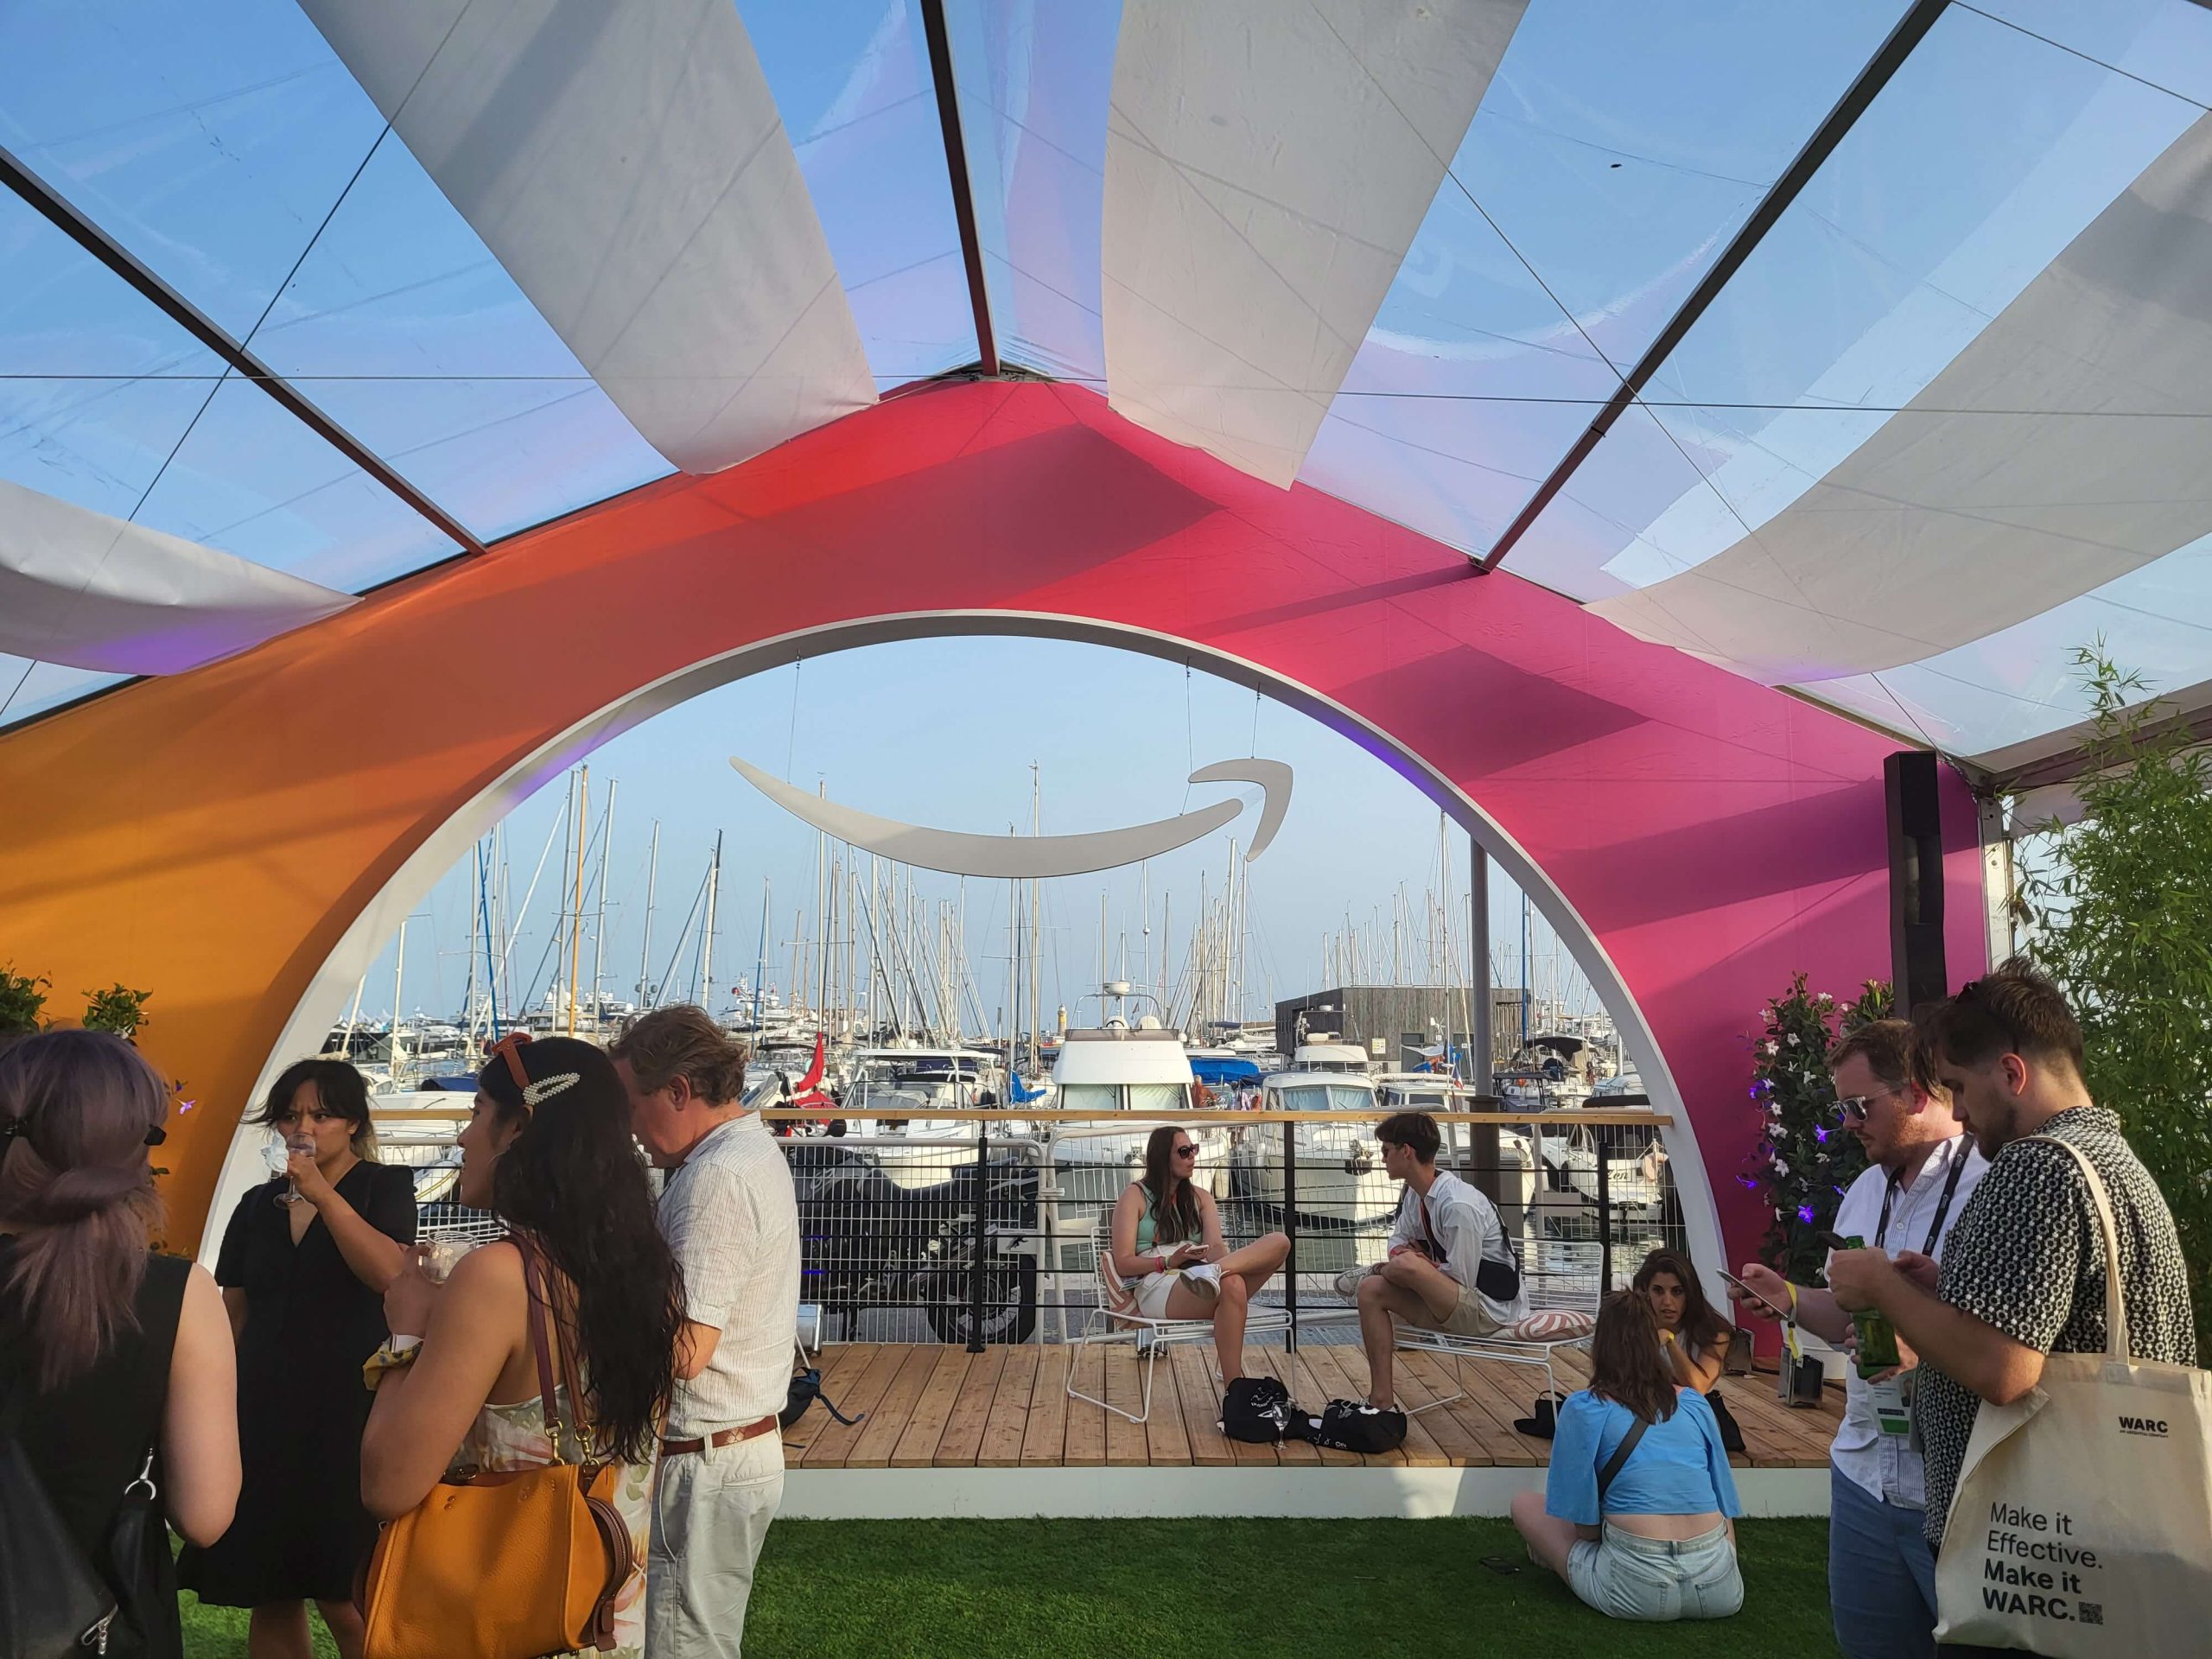 The Upcoming Event: June 19, 2023 – Official Festival Happy Hour Organized by Cannes Lions